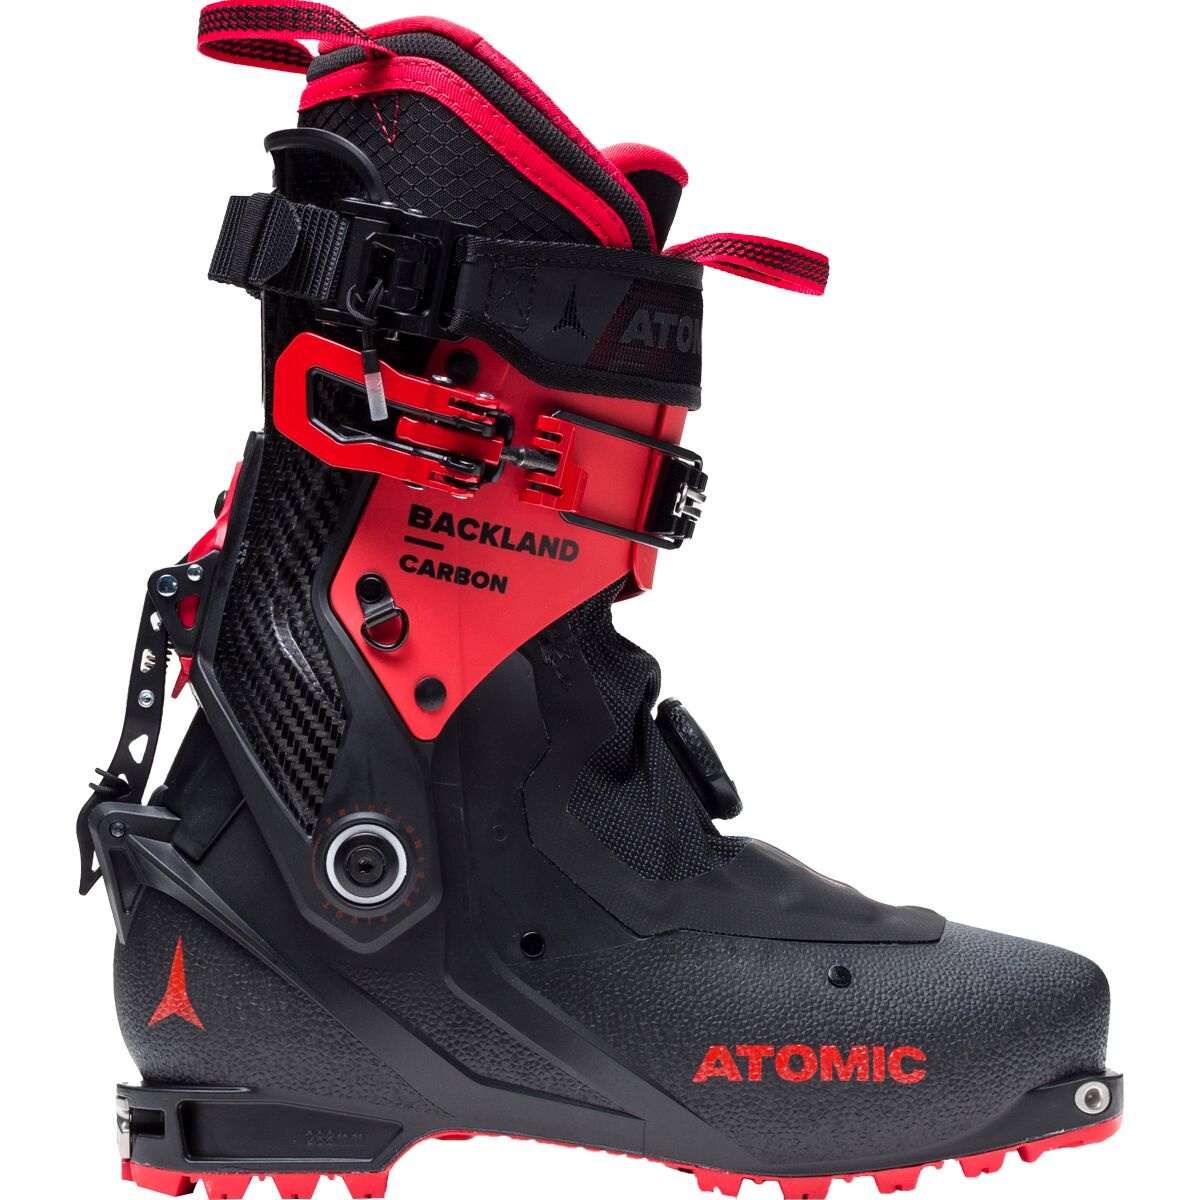 atomic backland carbon backcountry ski boots review